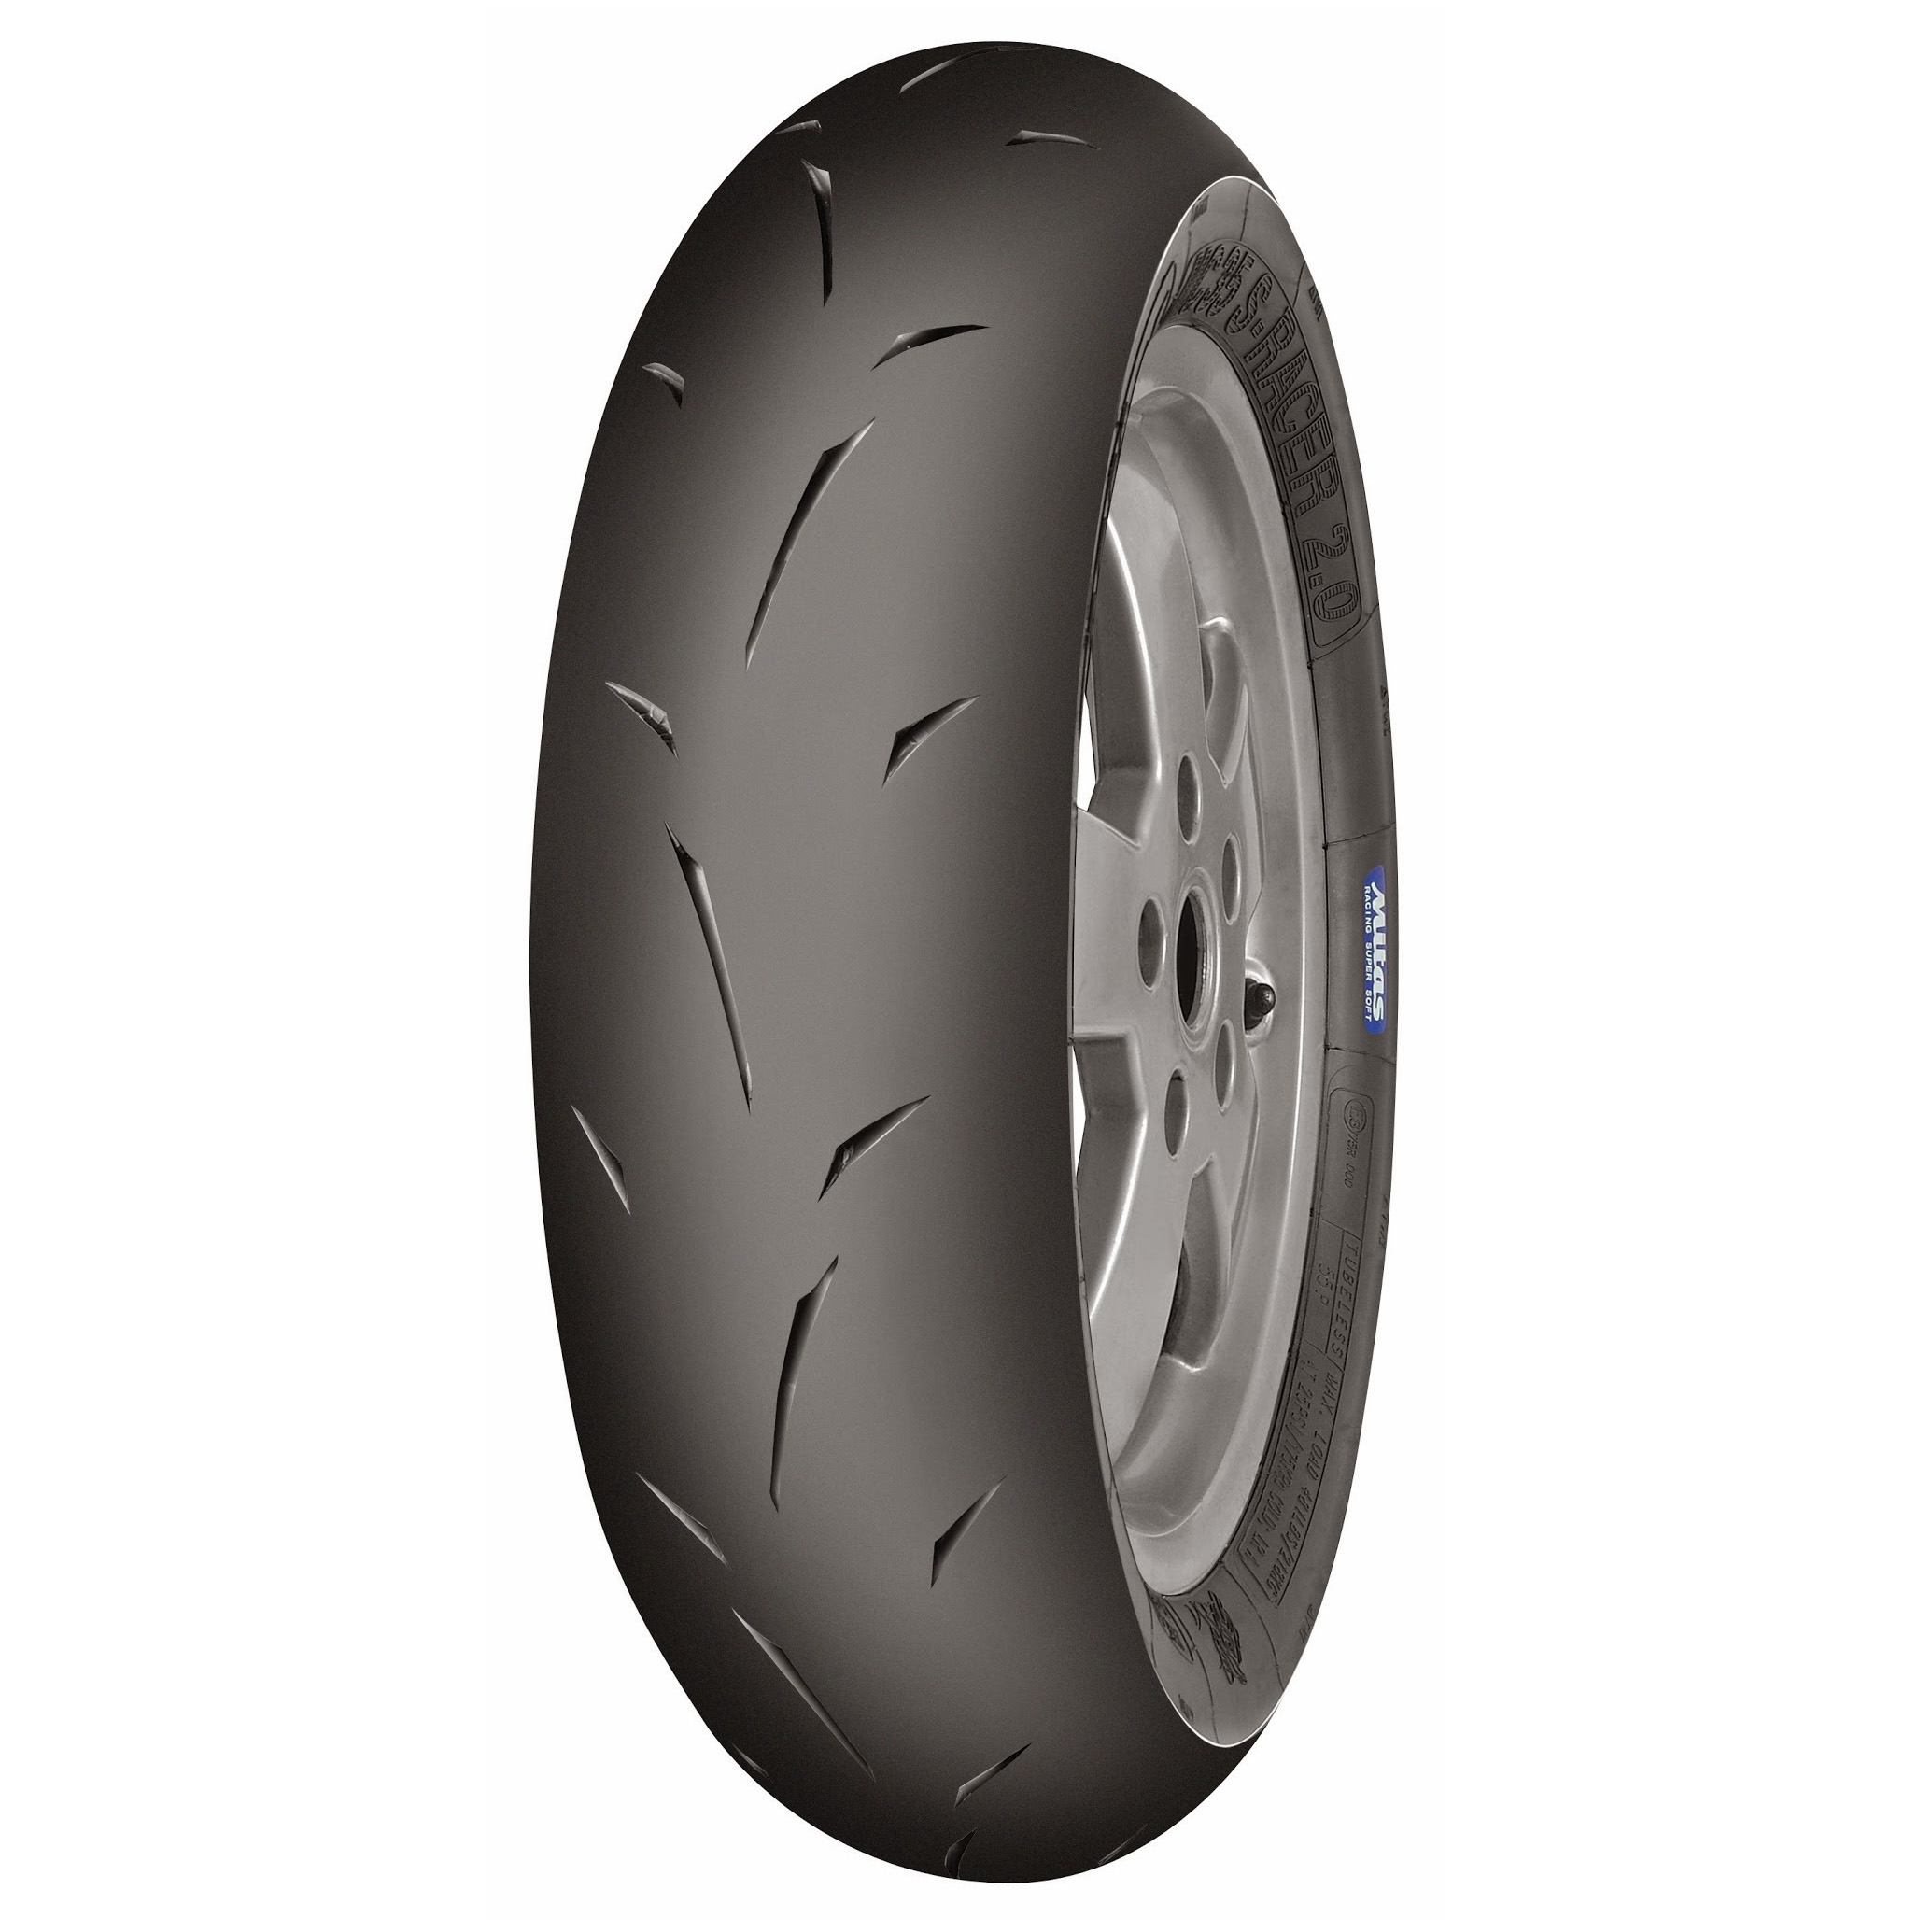 Gomme Nuove Goodyear 255/45 R20 105T UltraGrip Performance + FP XL M+S pneumatici nuovi Invernale